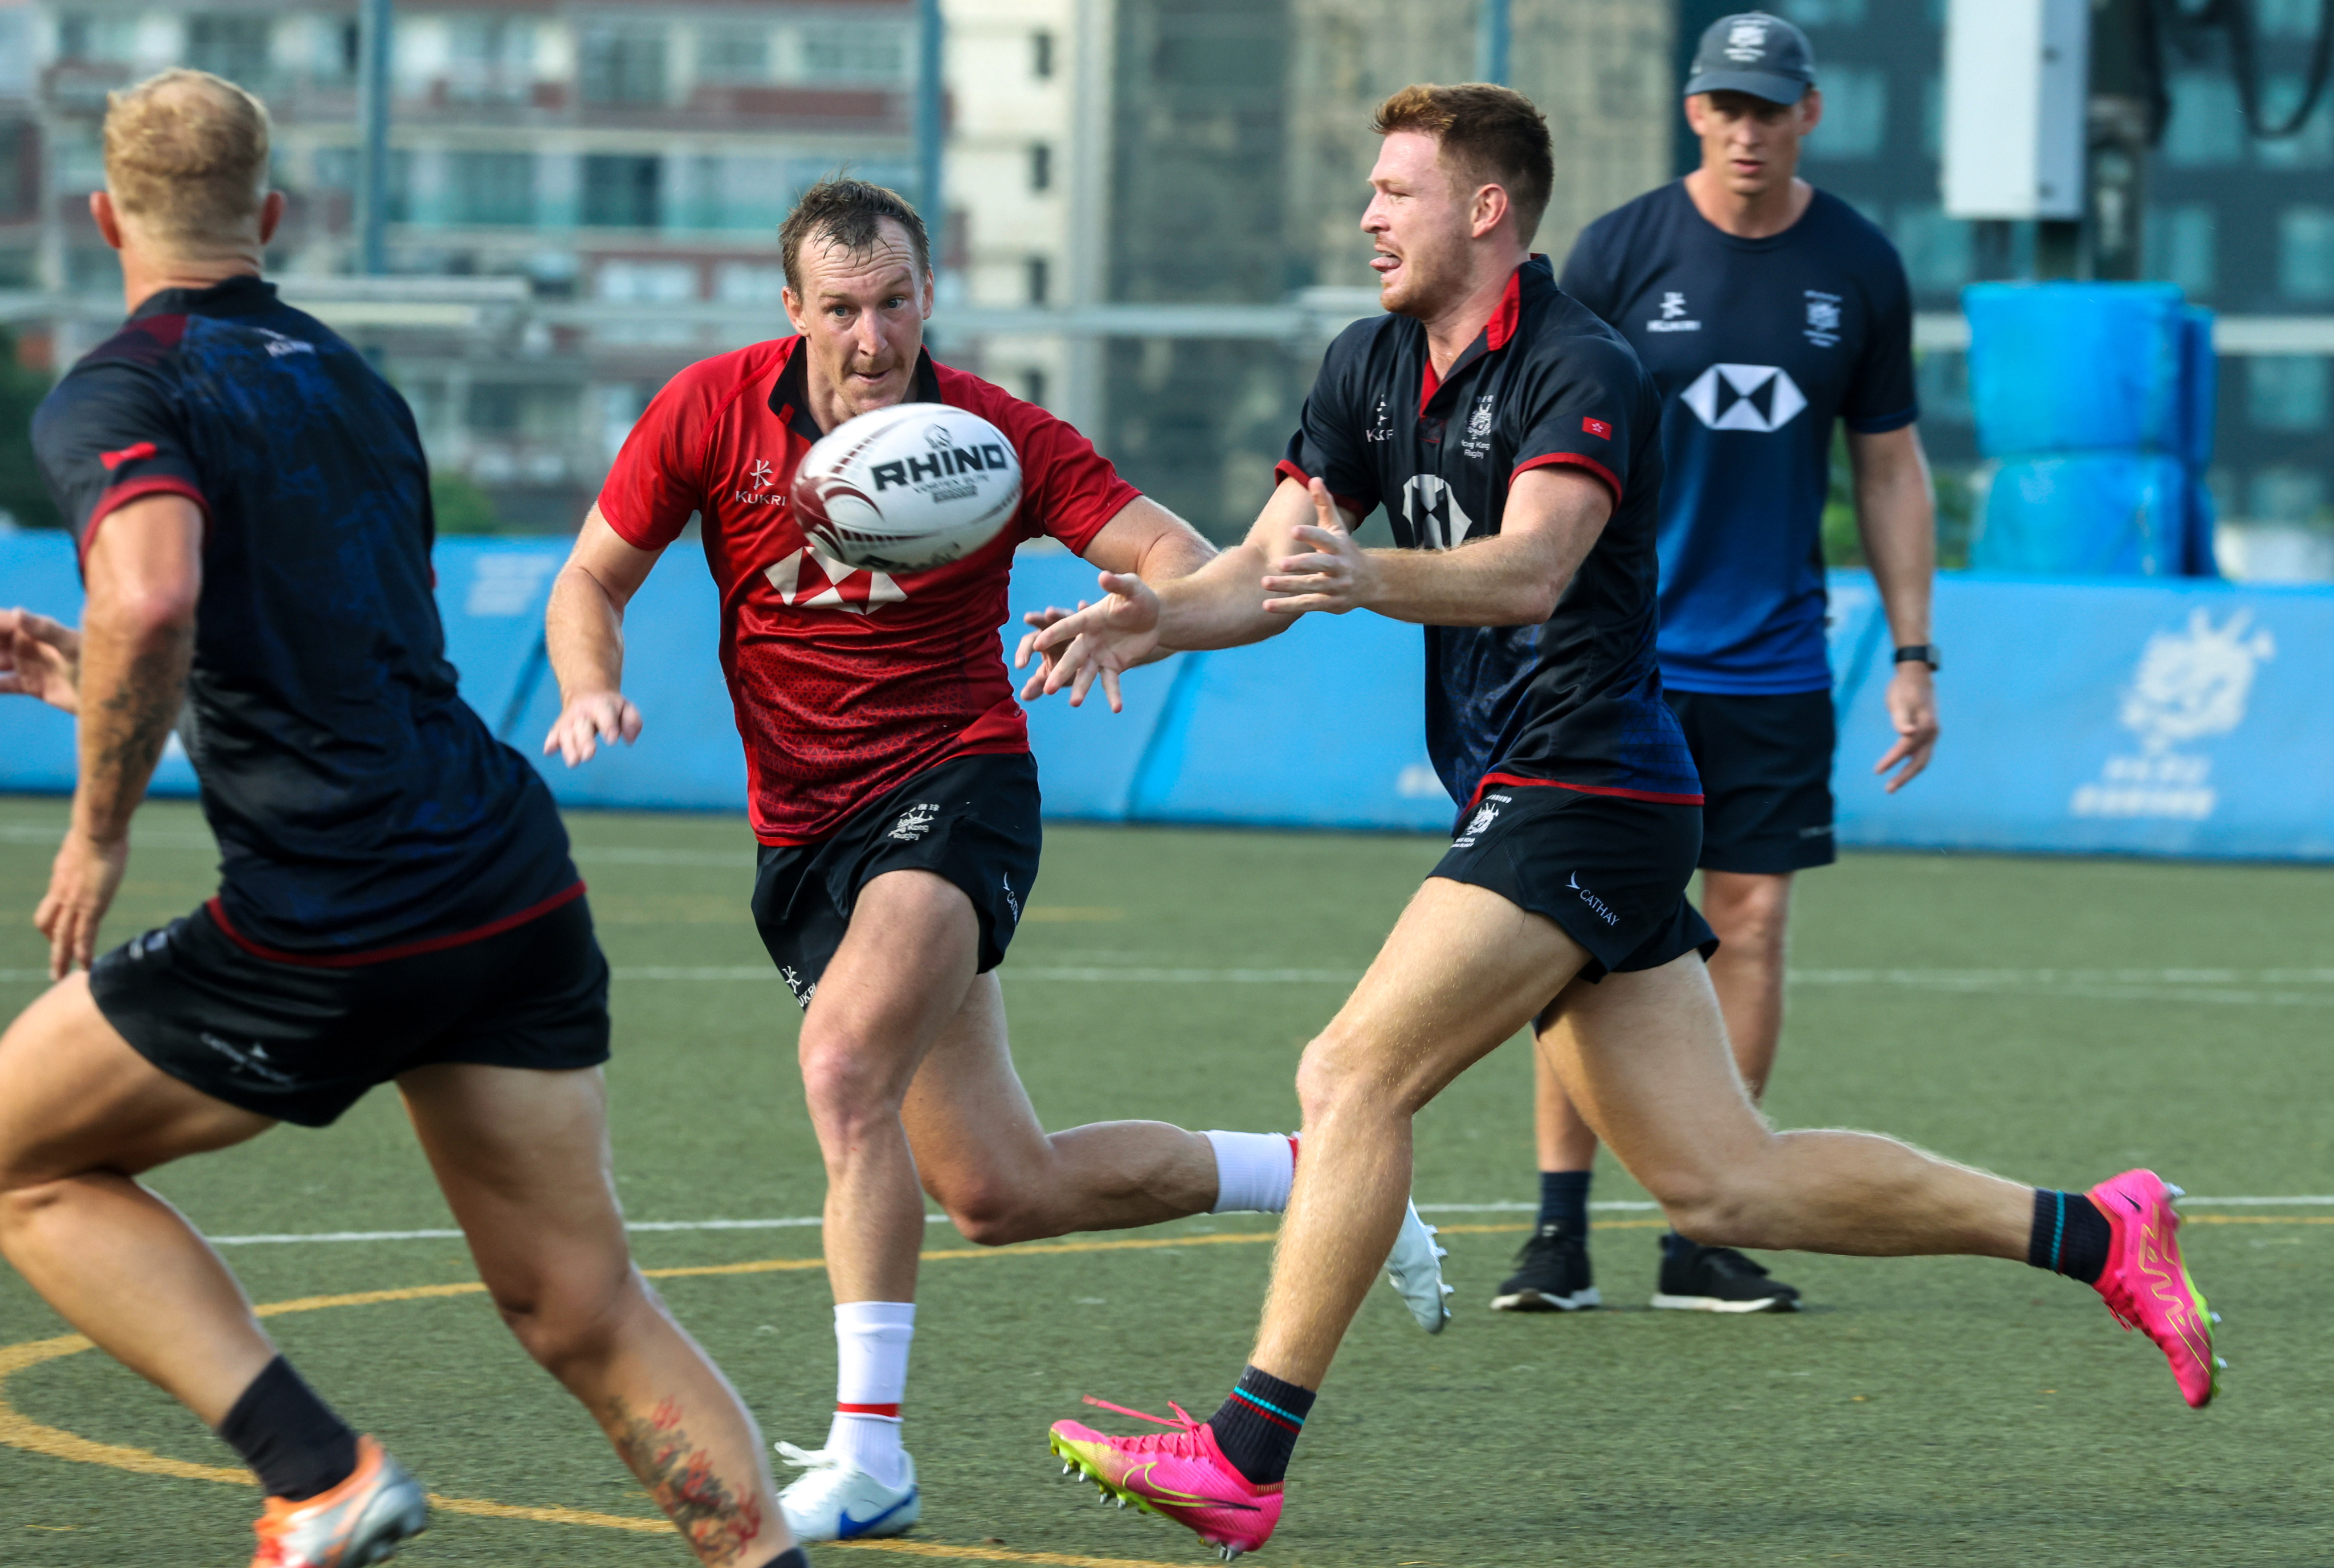 Hong Kong’s Liam Herbert (centre) in action during a training session at King’s Park. Photo: Yik Yeung-man